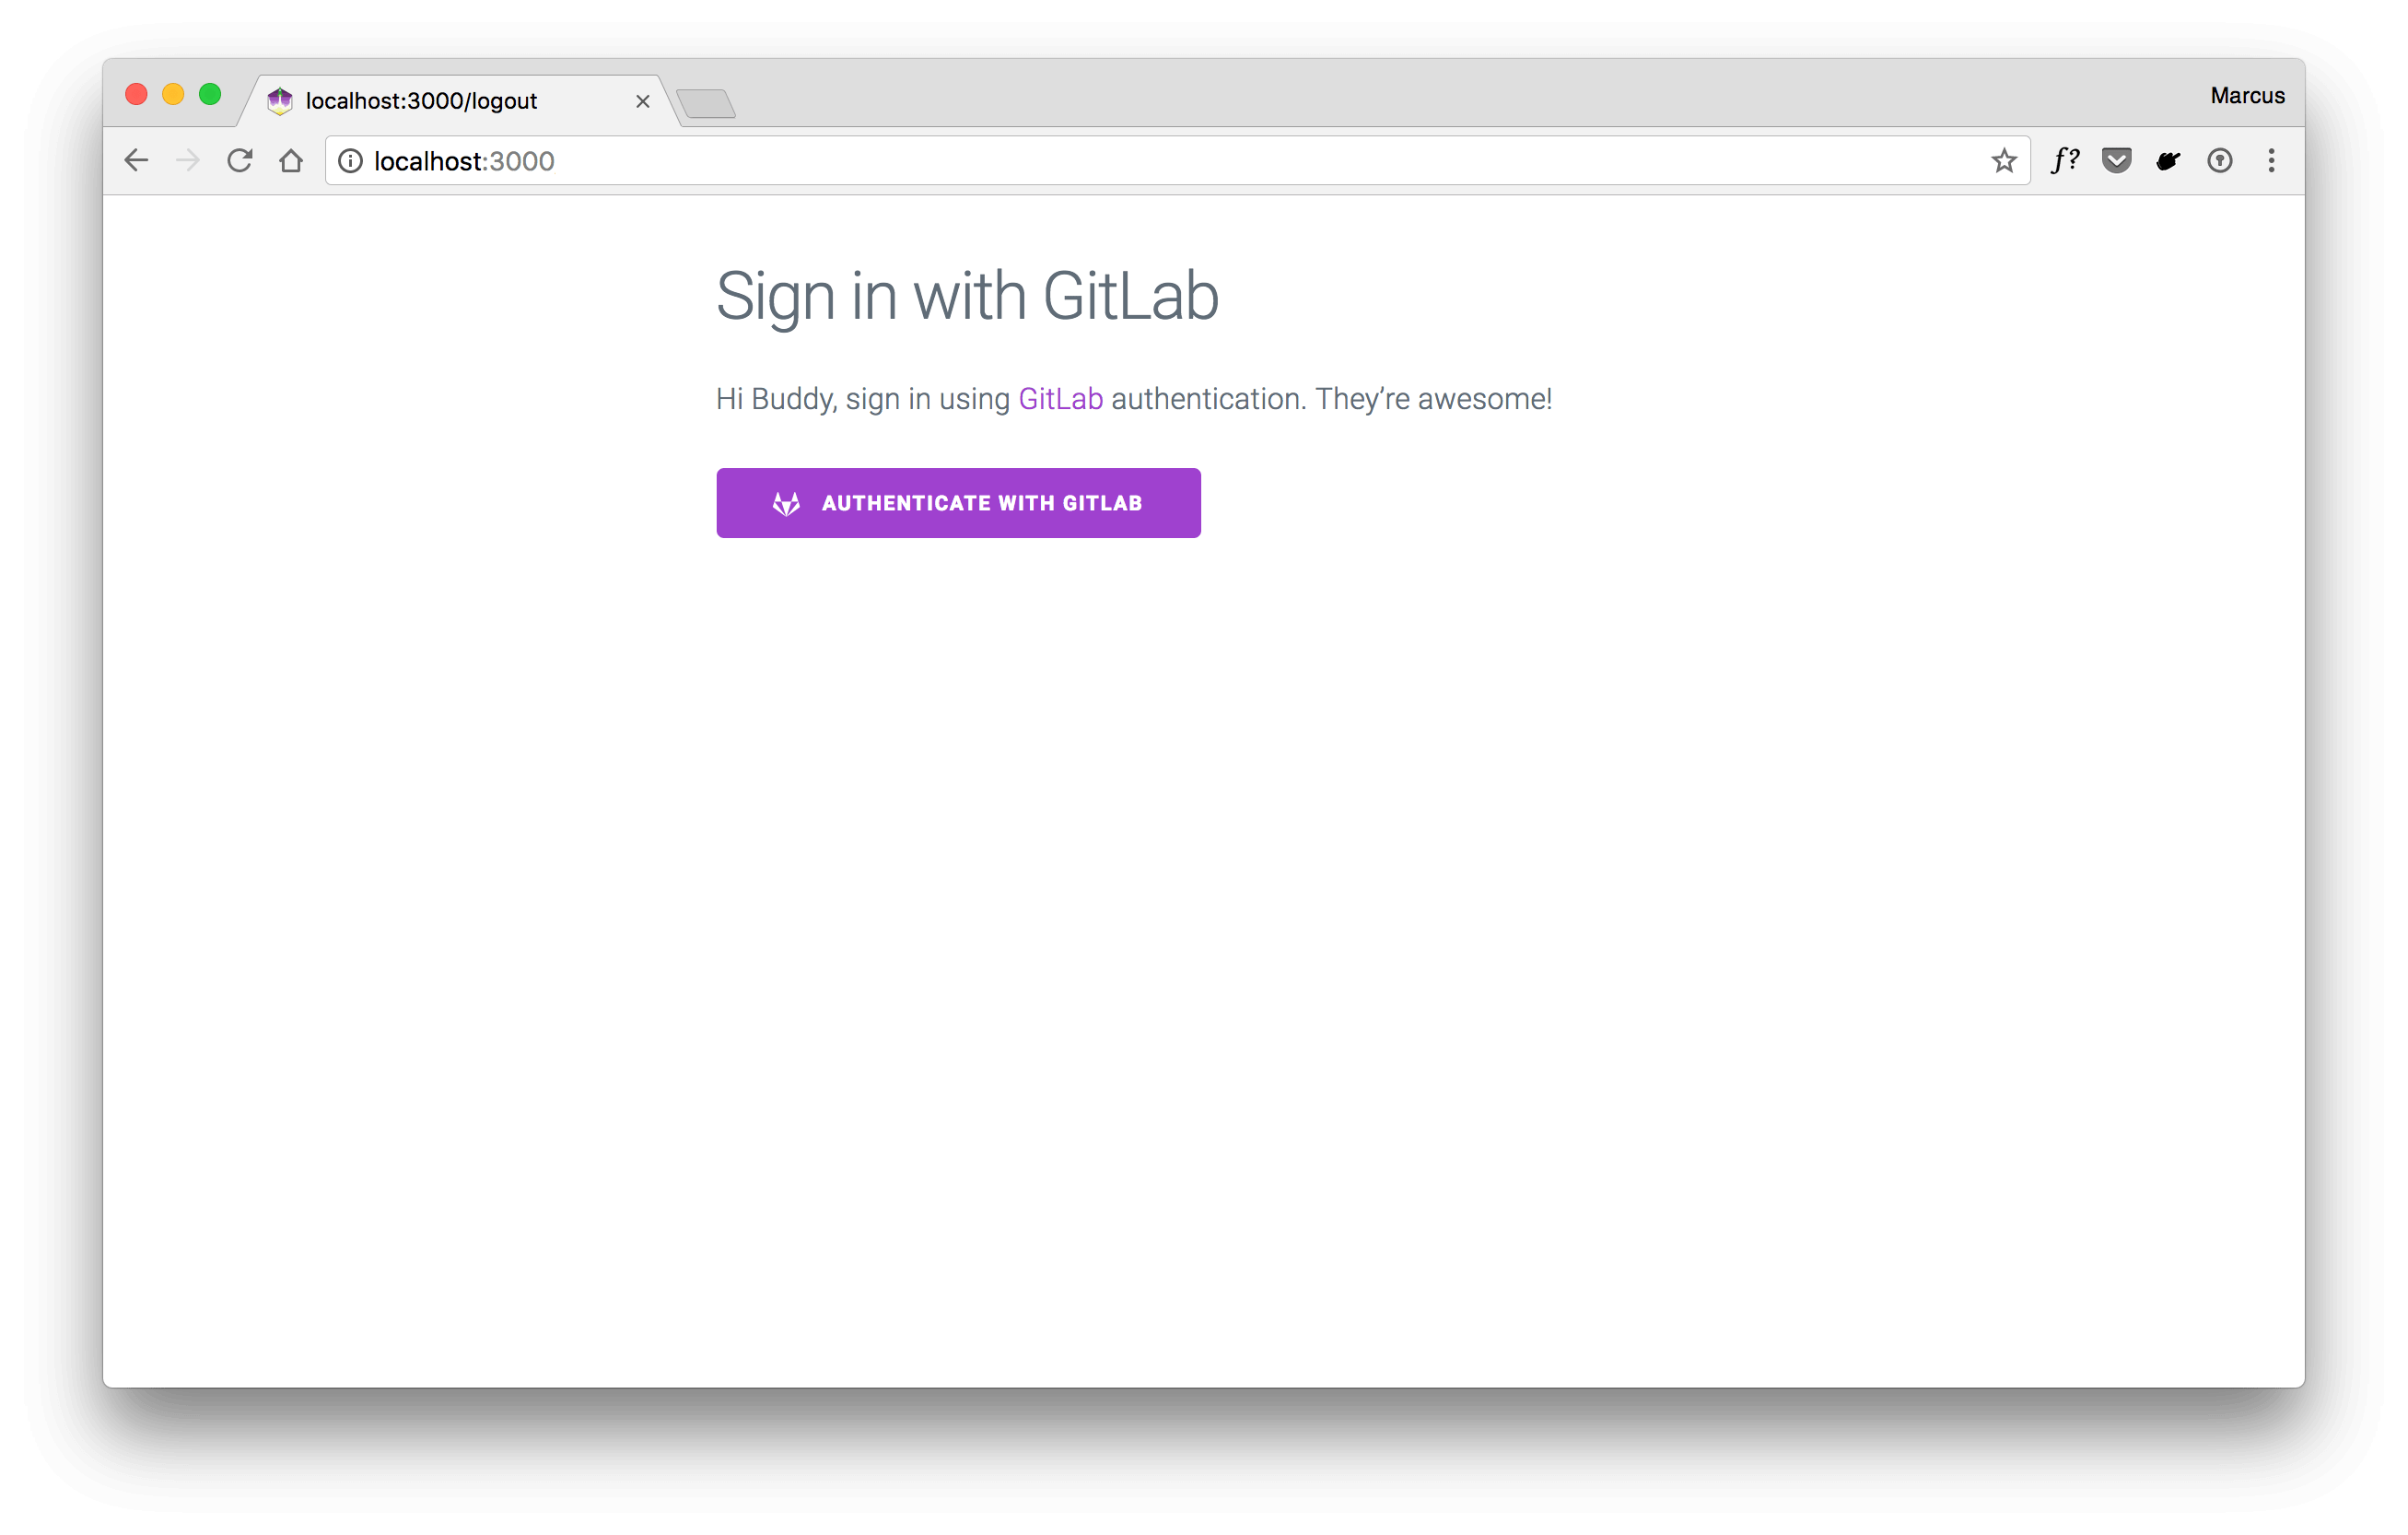 Sign in with GitLab view